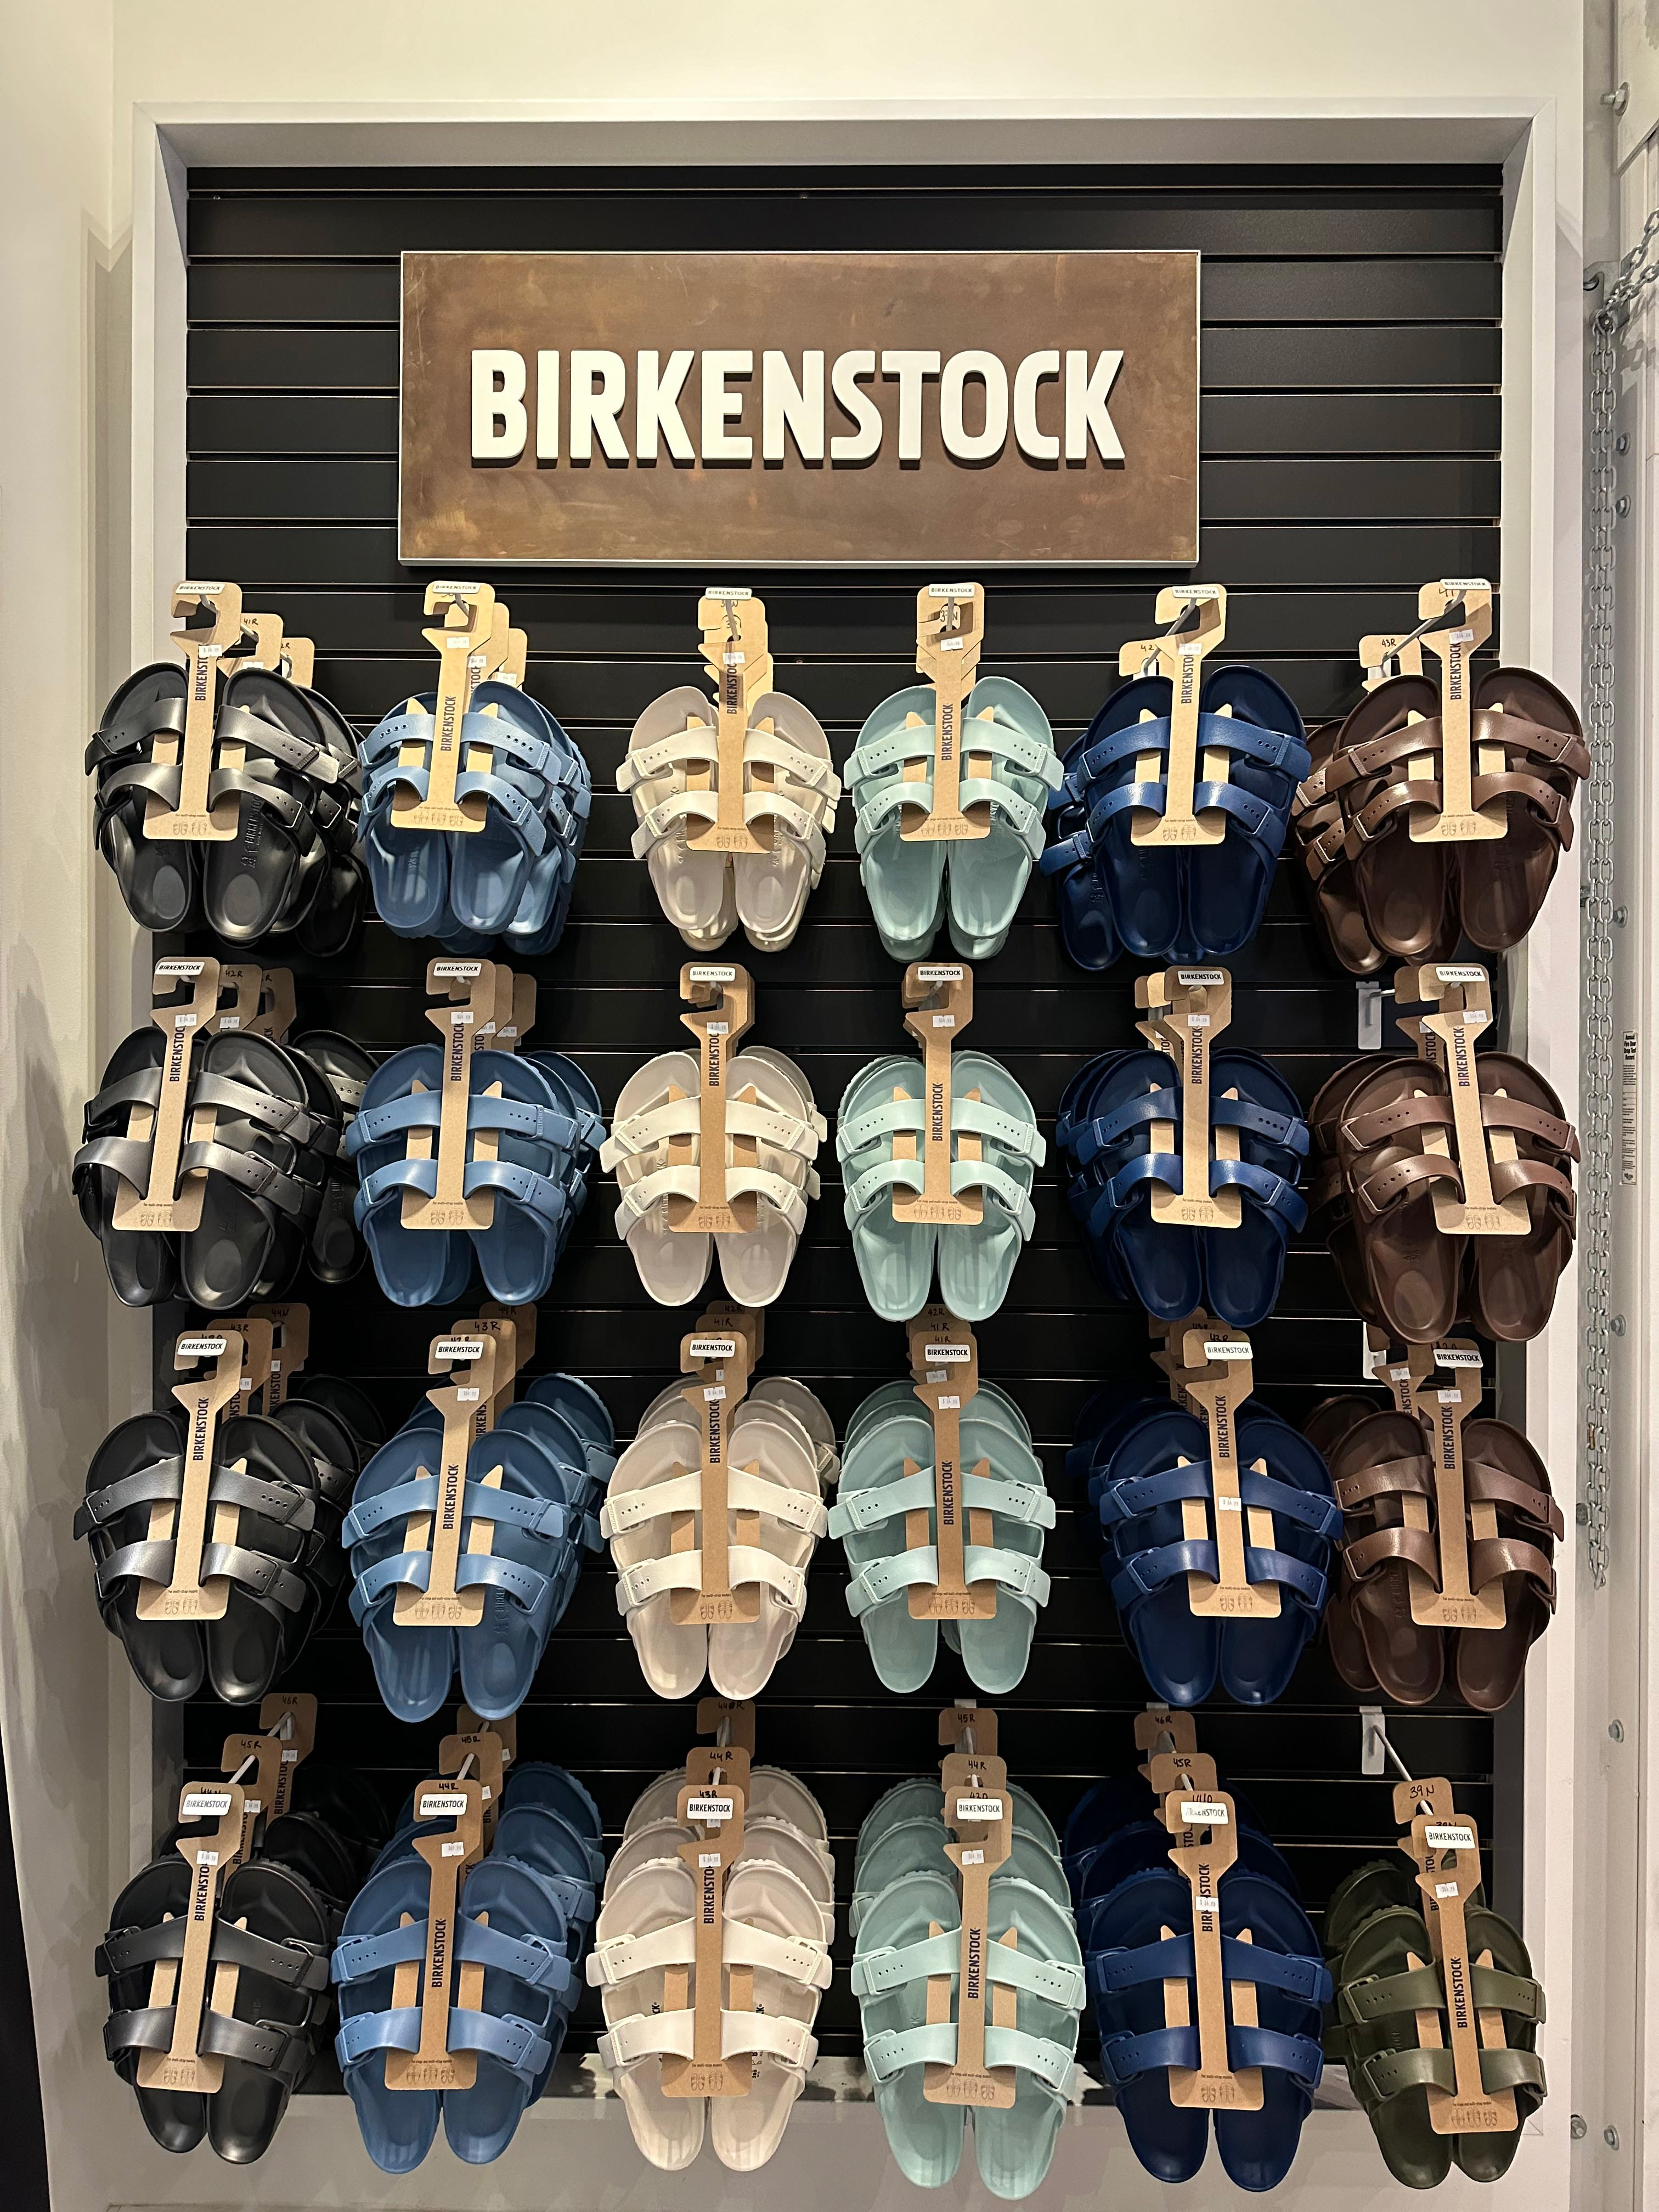 Our Birkenstock EVA wall which comes with a wide range of sizes and widths.